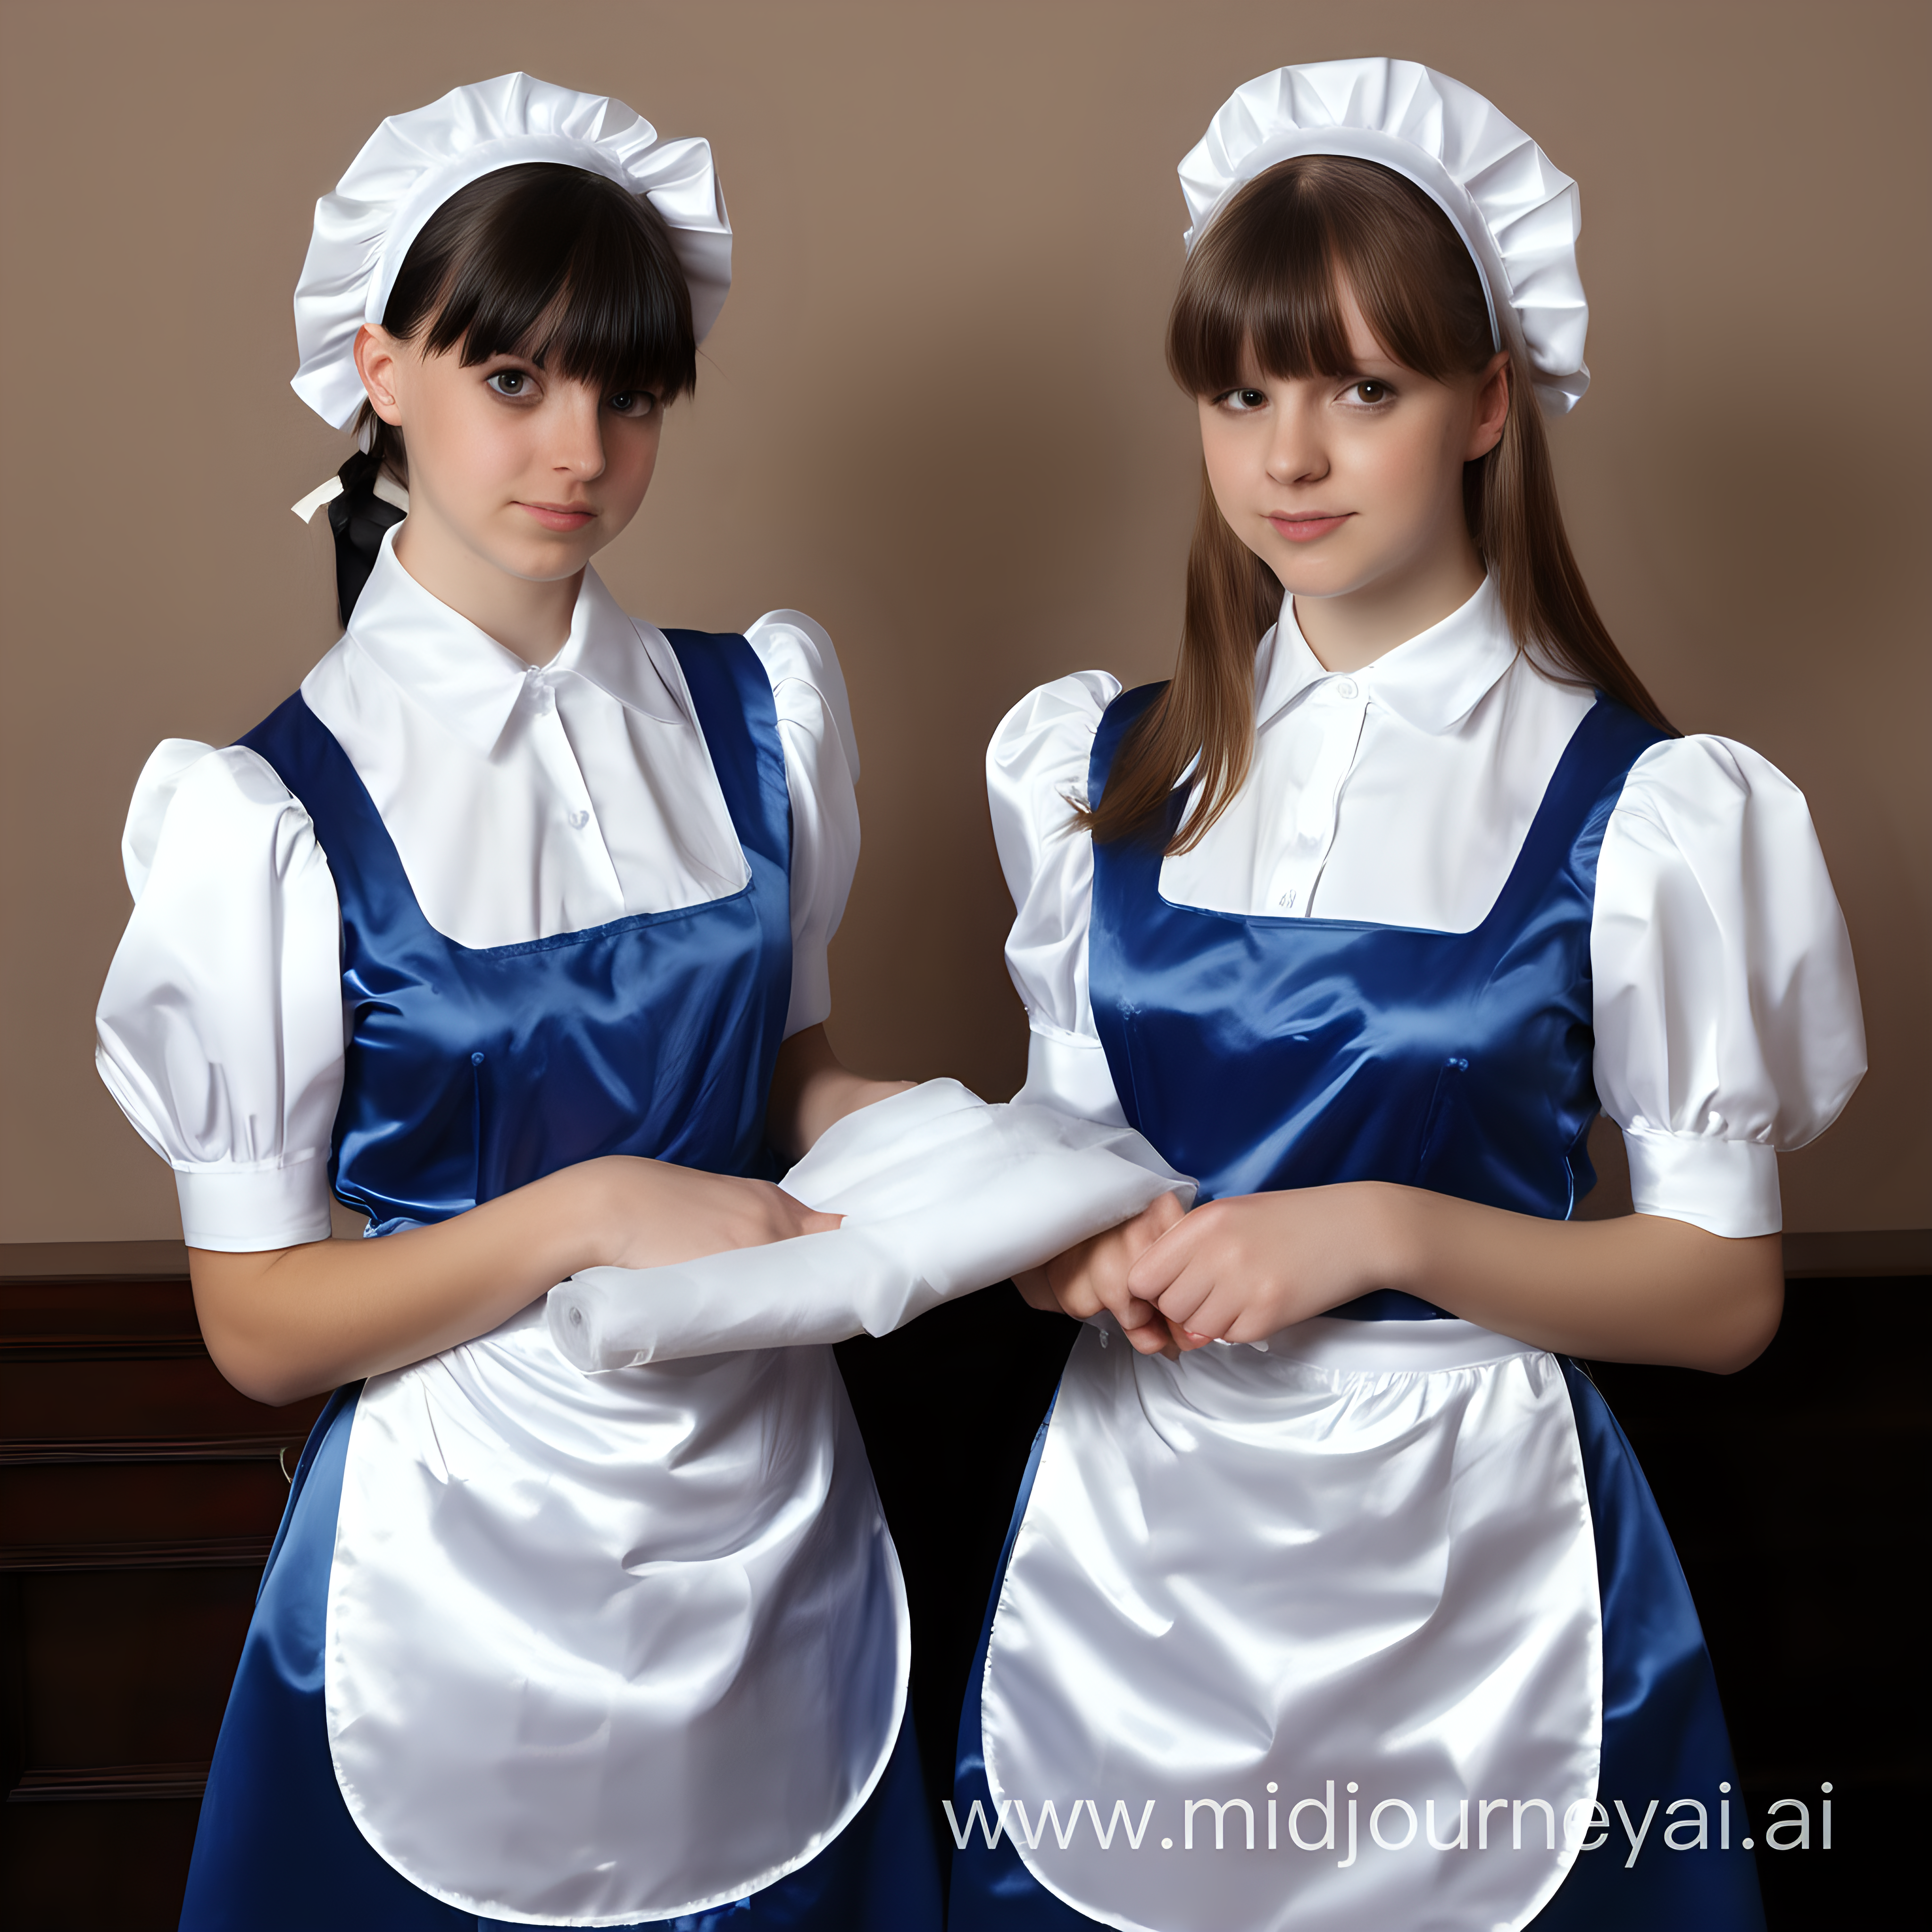 two Girls in satin long maid uniforms